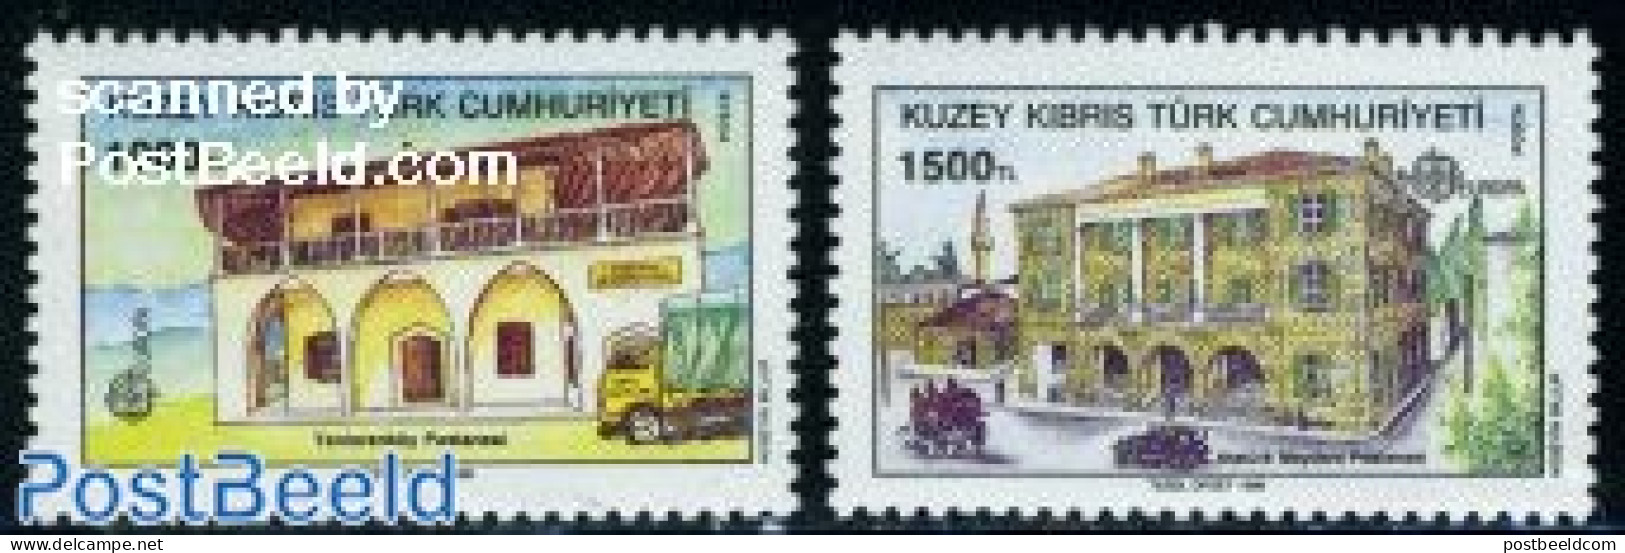 Turkish Cyprus 1990 Europa, Post Offices 2v, Mint NH, History - Transport - Europa (cept) - Post - Automobiles - Post